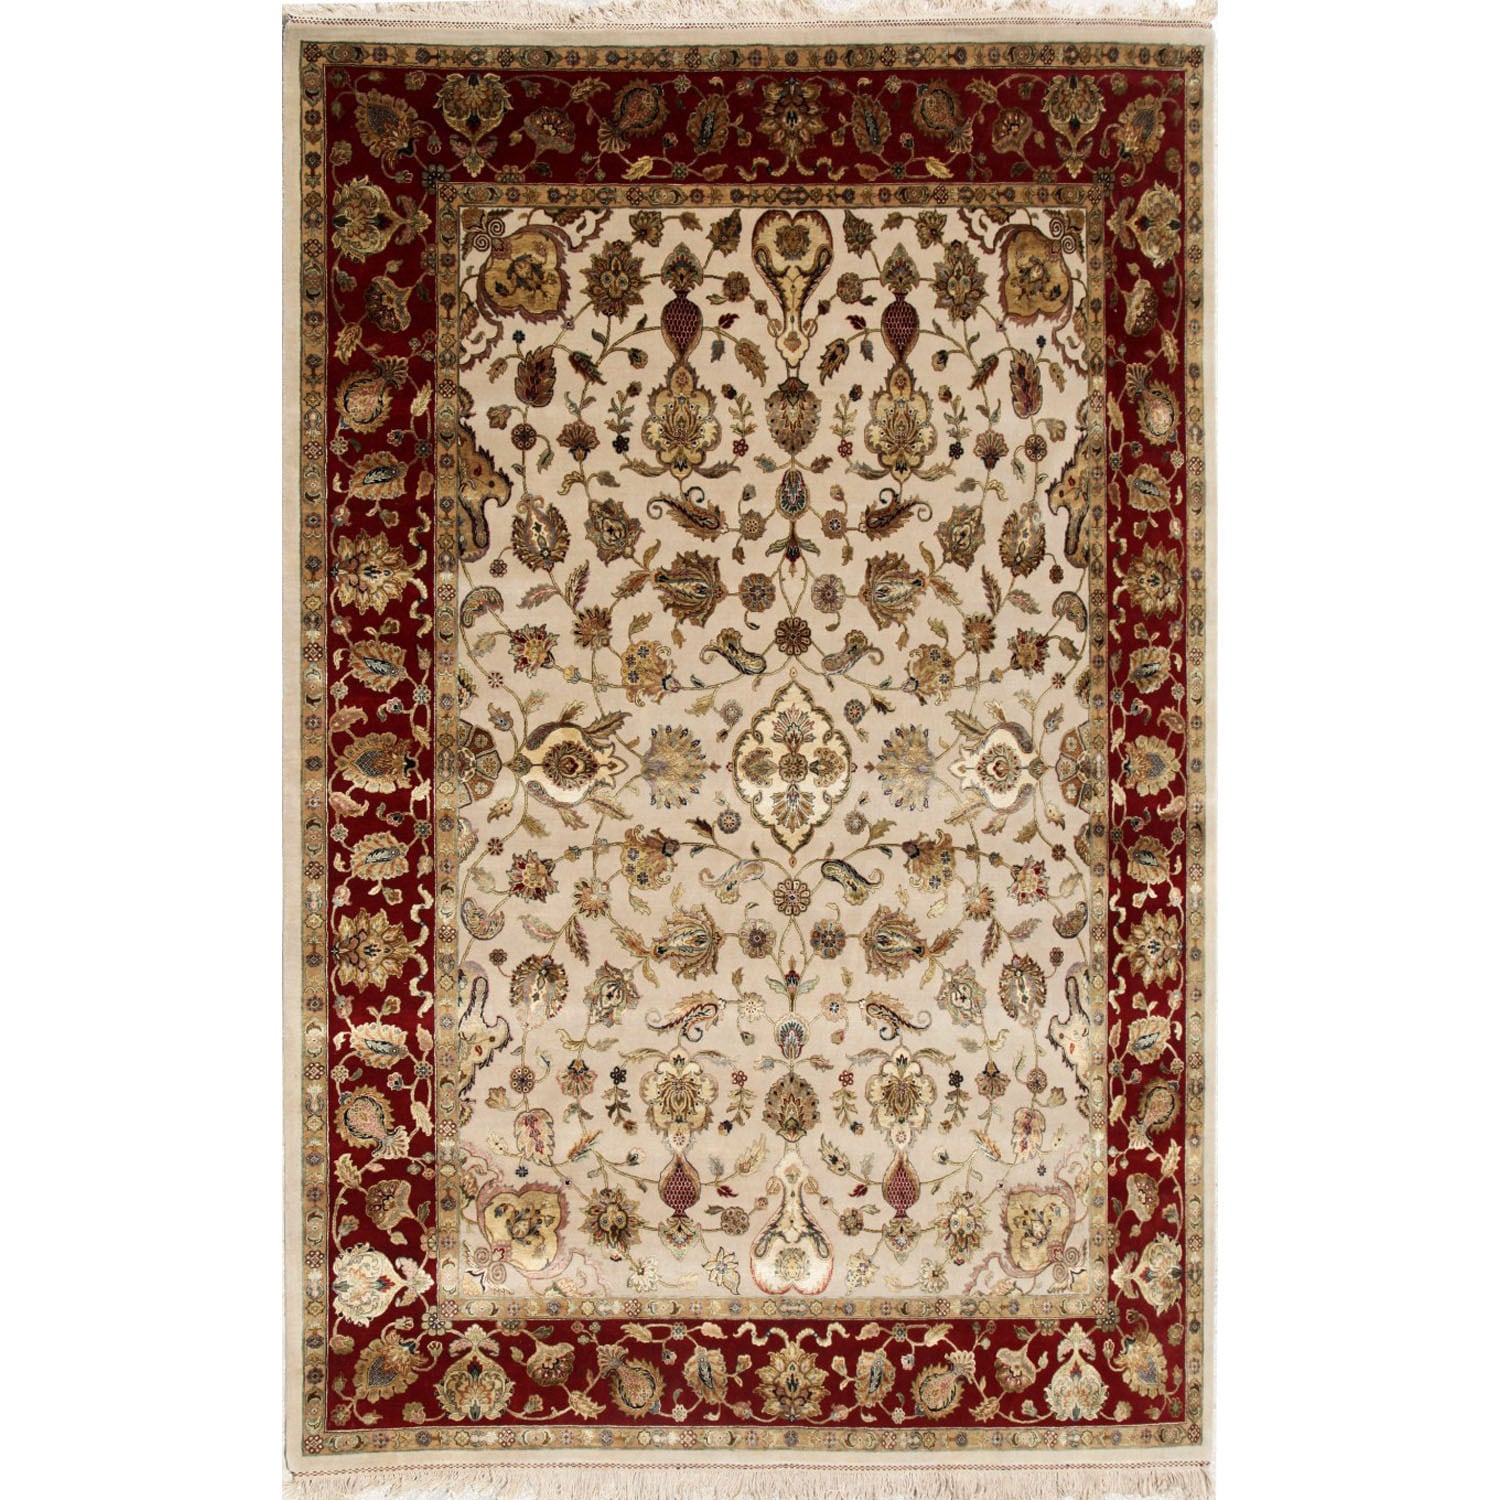 Hand knotted Ivory Oriental Pattern Wool/ Silk Rug (6 X 9)